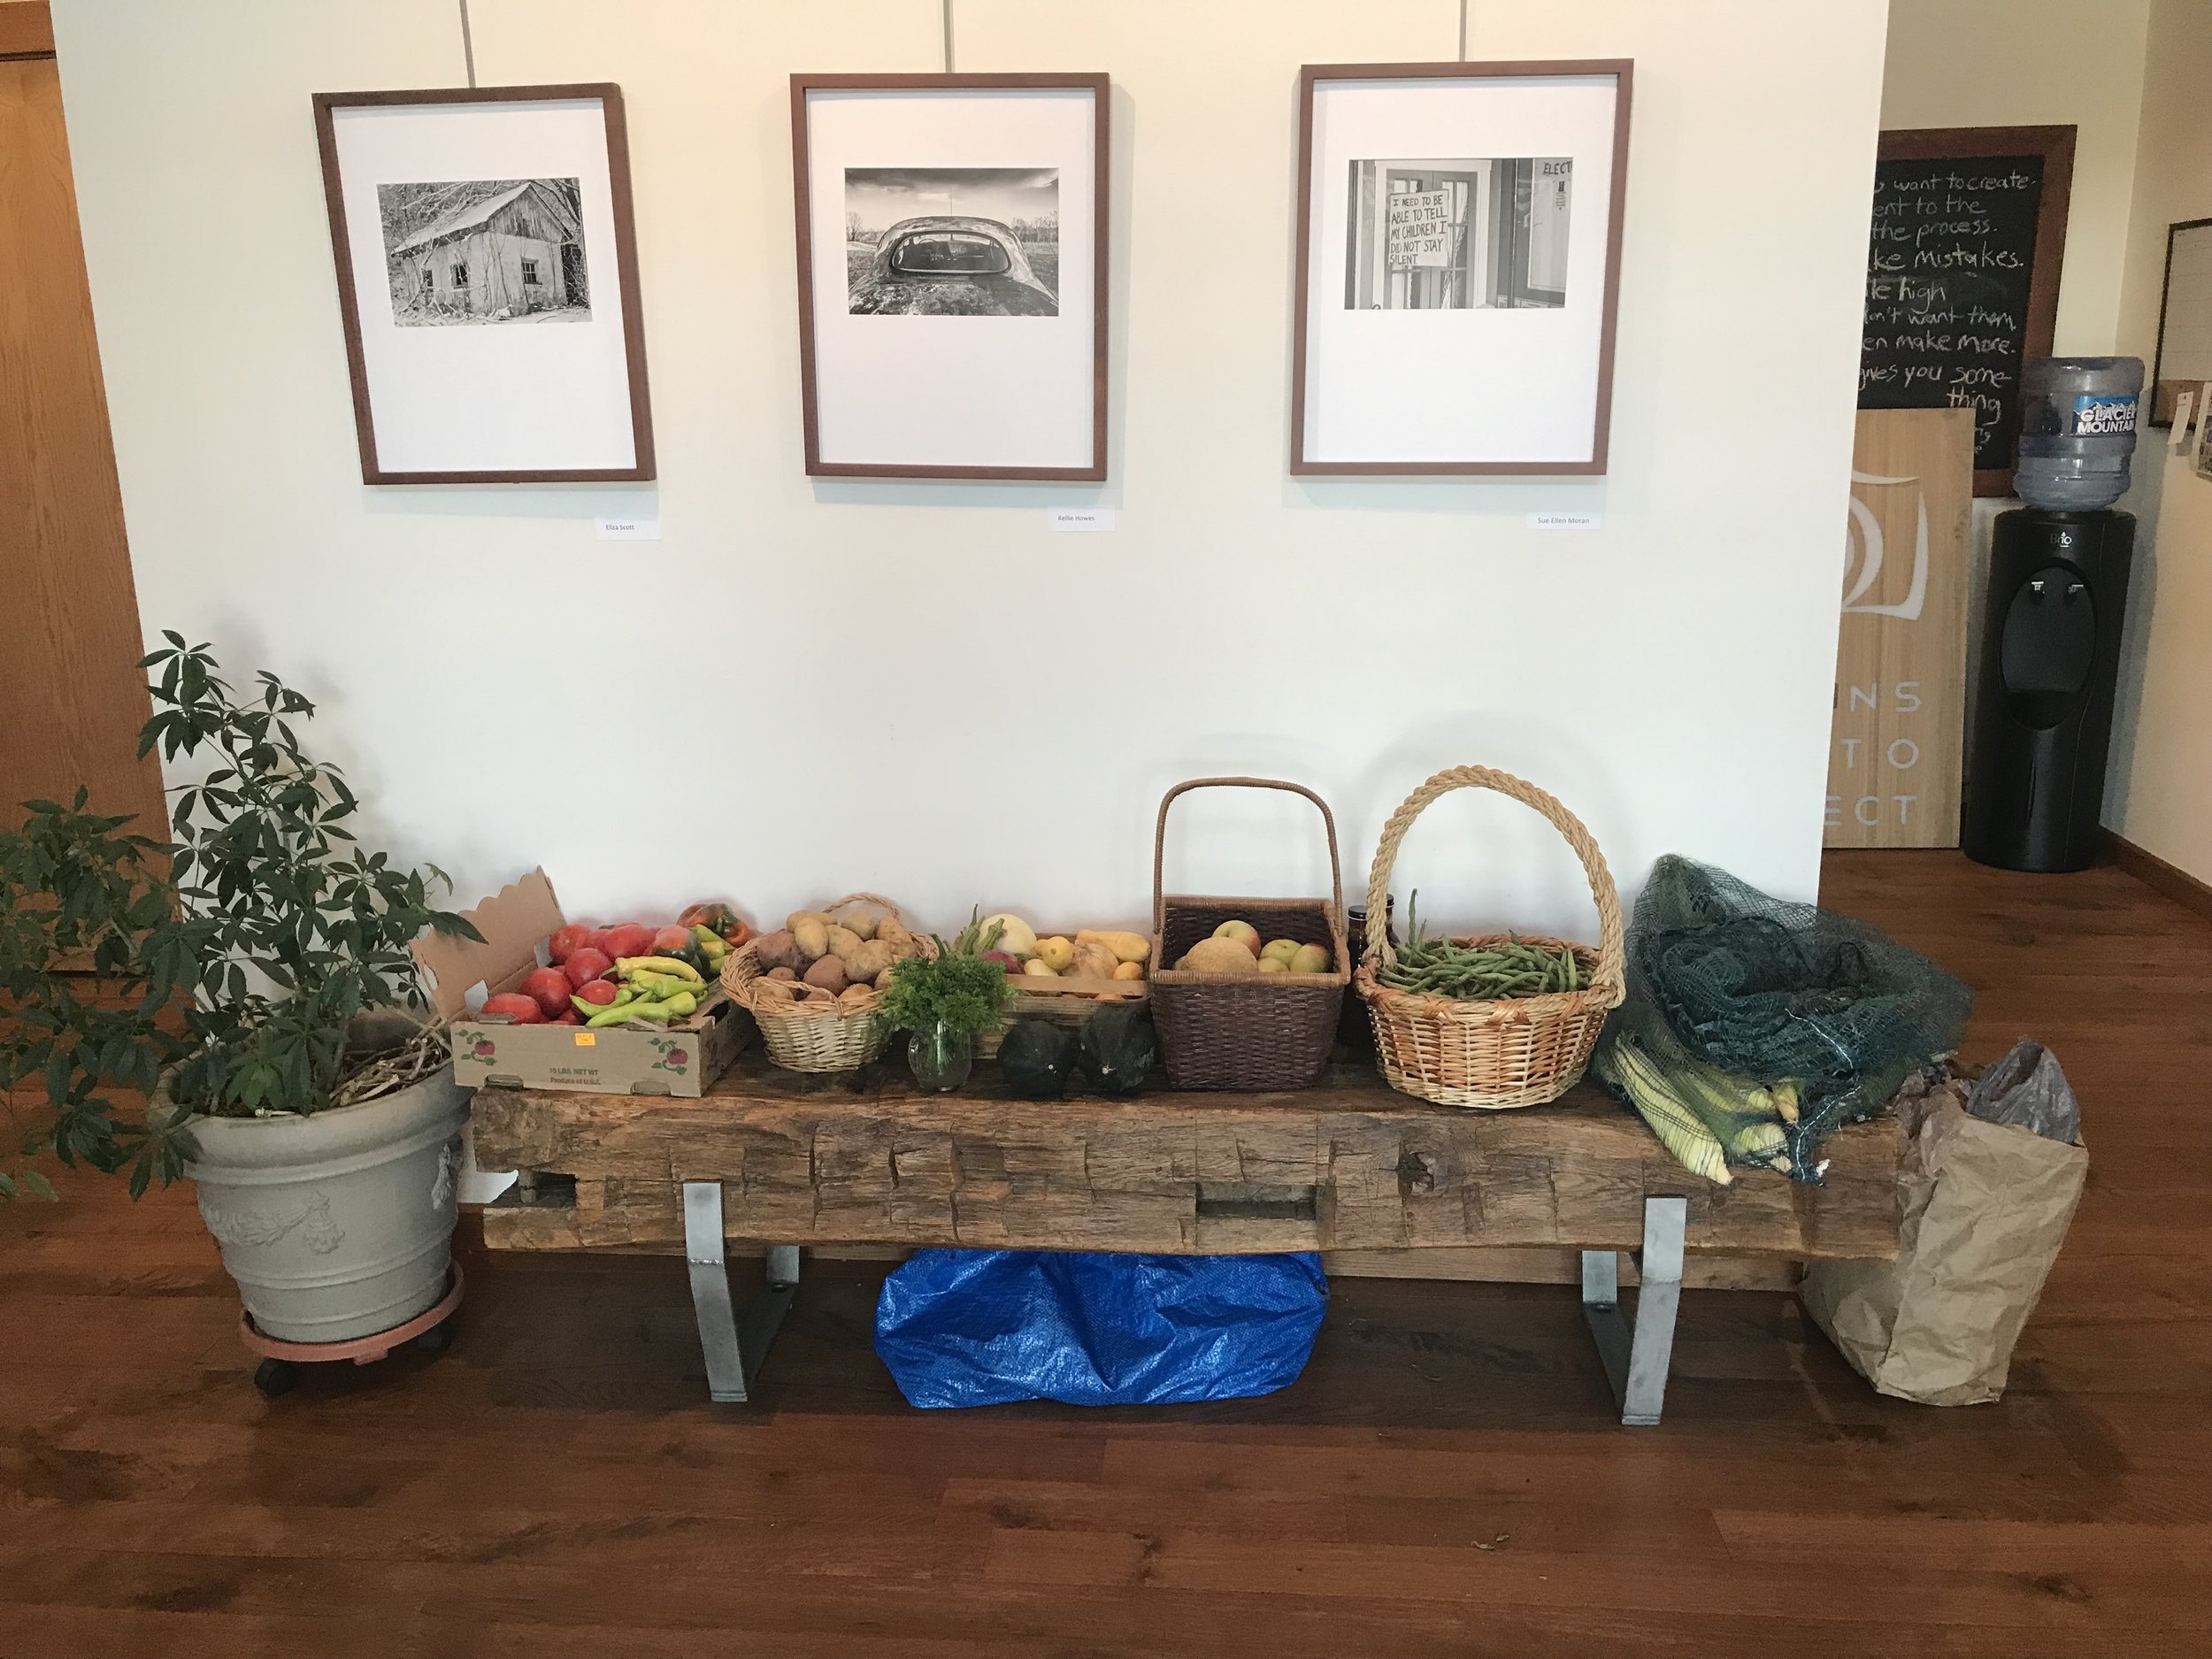  Athens Photographic Project Studio. Local food donations thanks to local farmers and the Community Food Initiatives.  